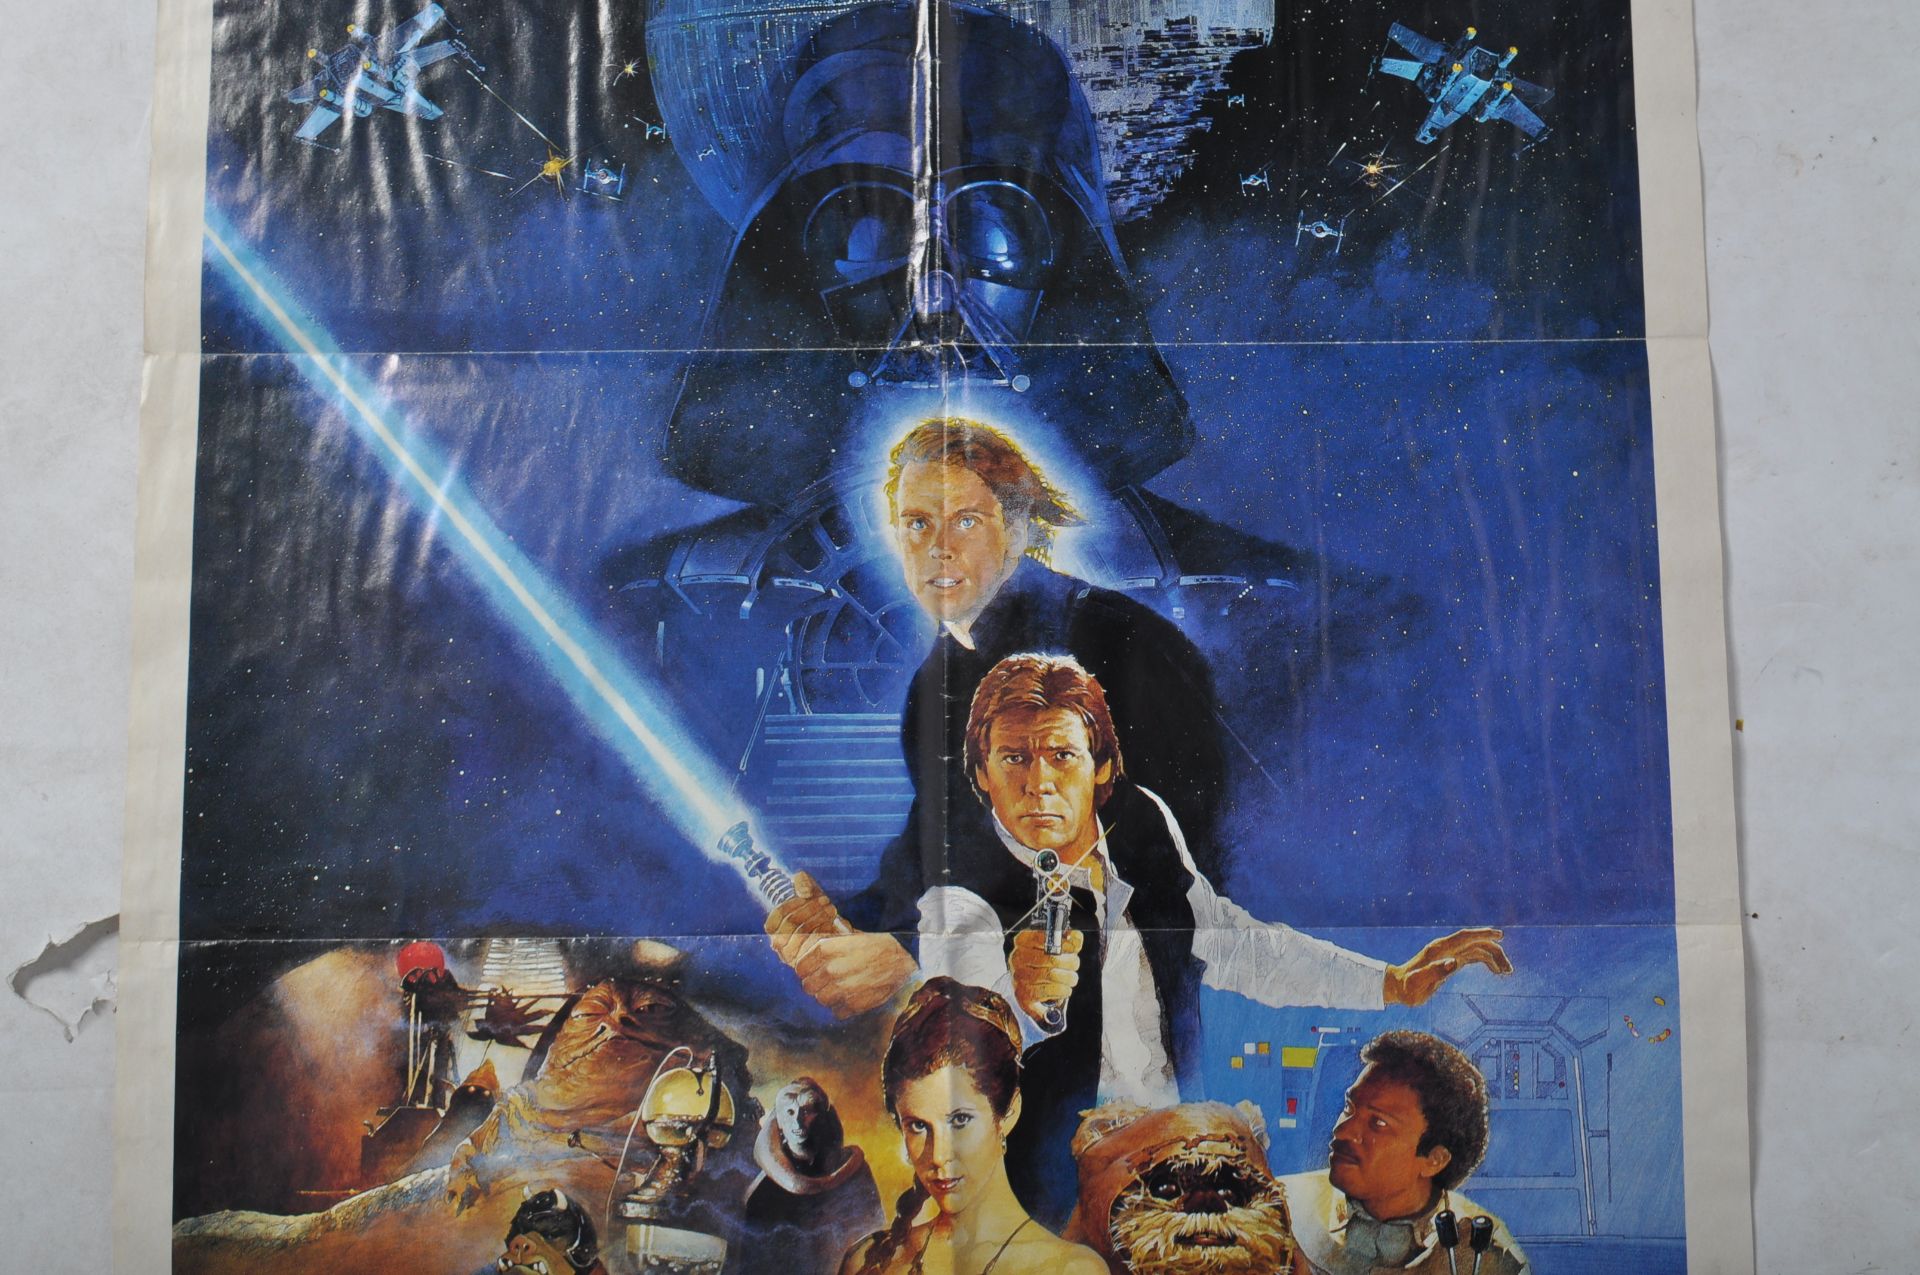 ESTATE OF DAVE PROWSE - AUSTRALIAN ROTJ STAR WARS POSTER - Image 3 of 5